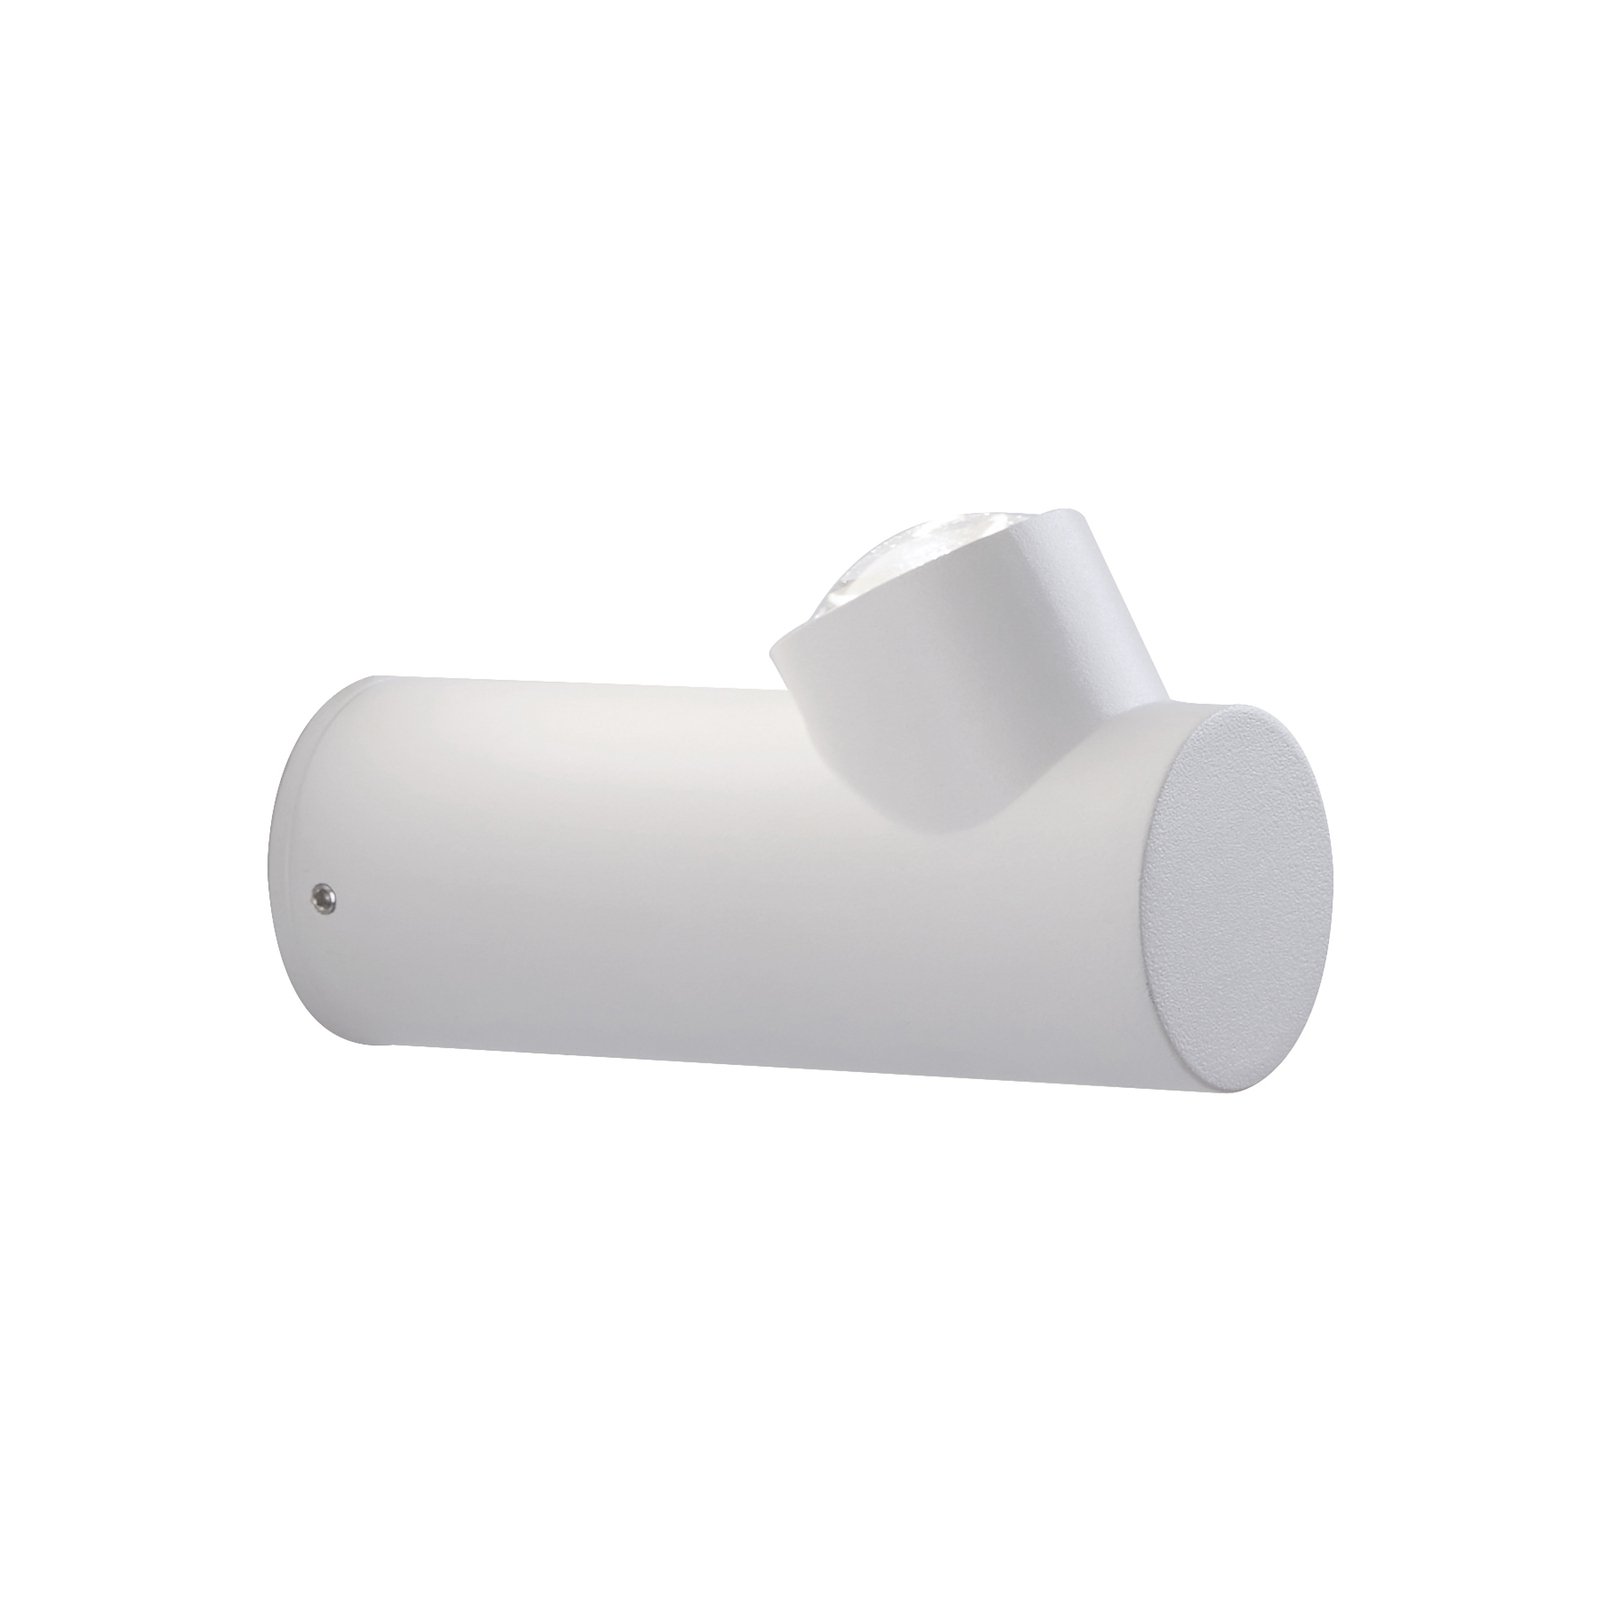 LED outdoor wall lamp Vox, white